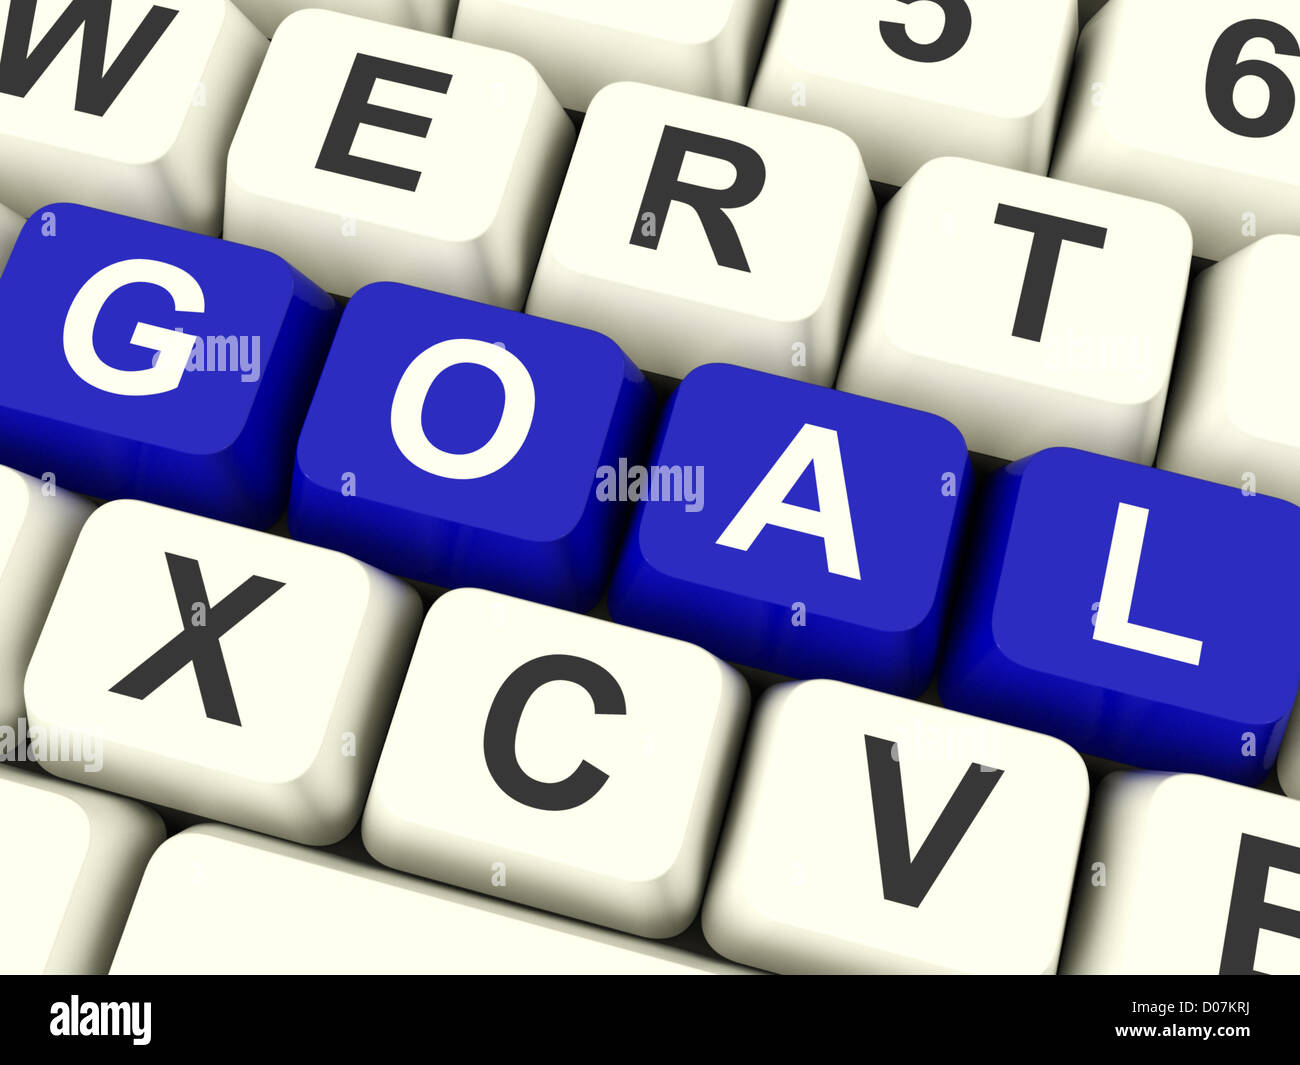 Goals Computer Keys Showing Objectives Hopes And Future Stock Photo